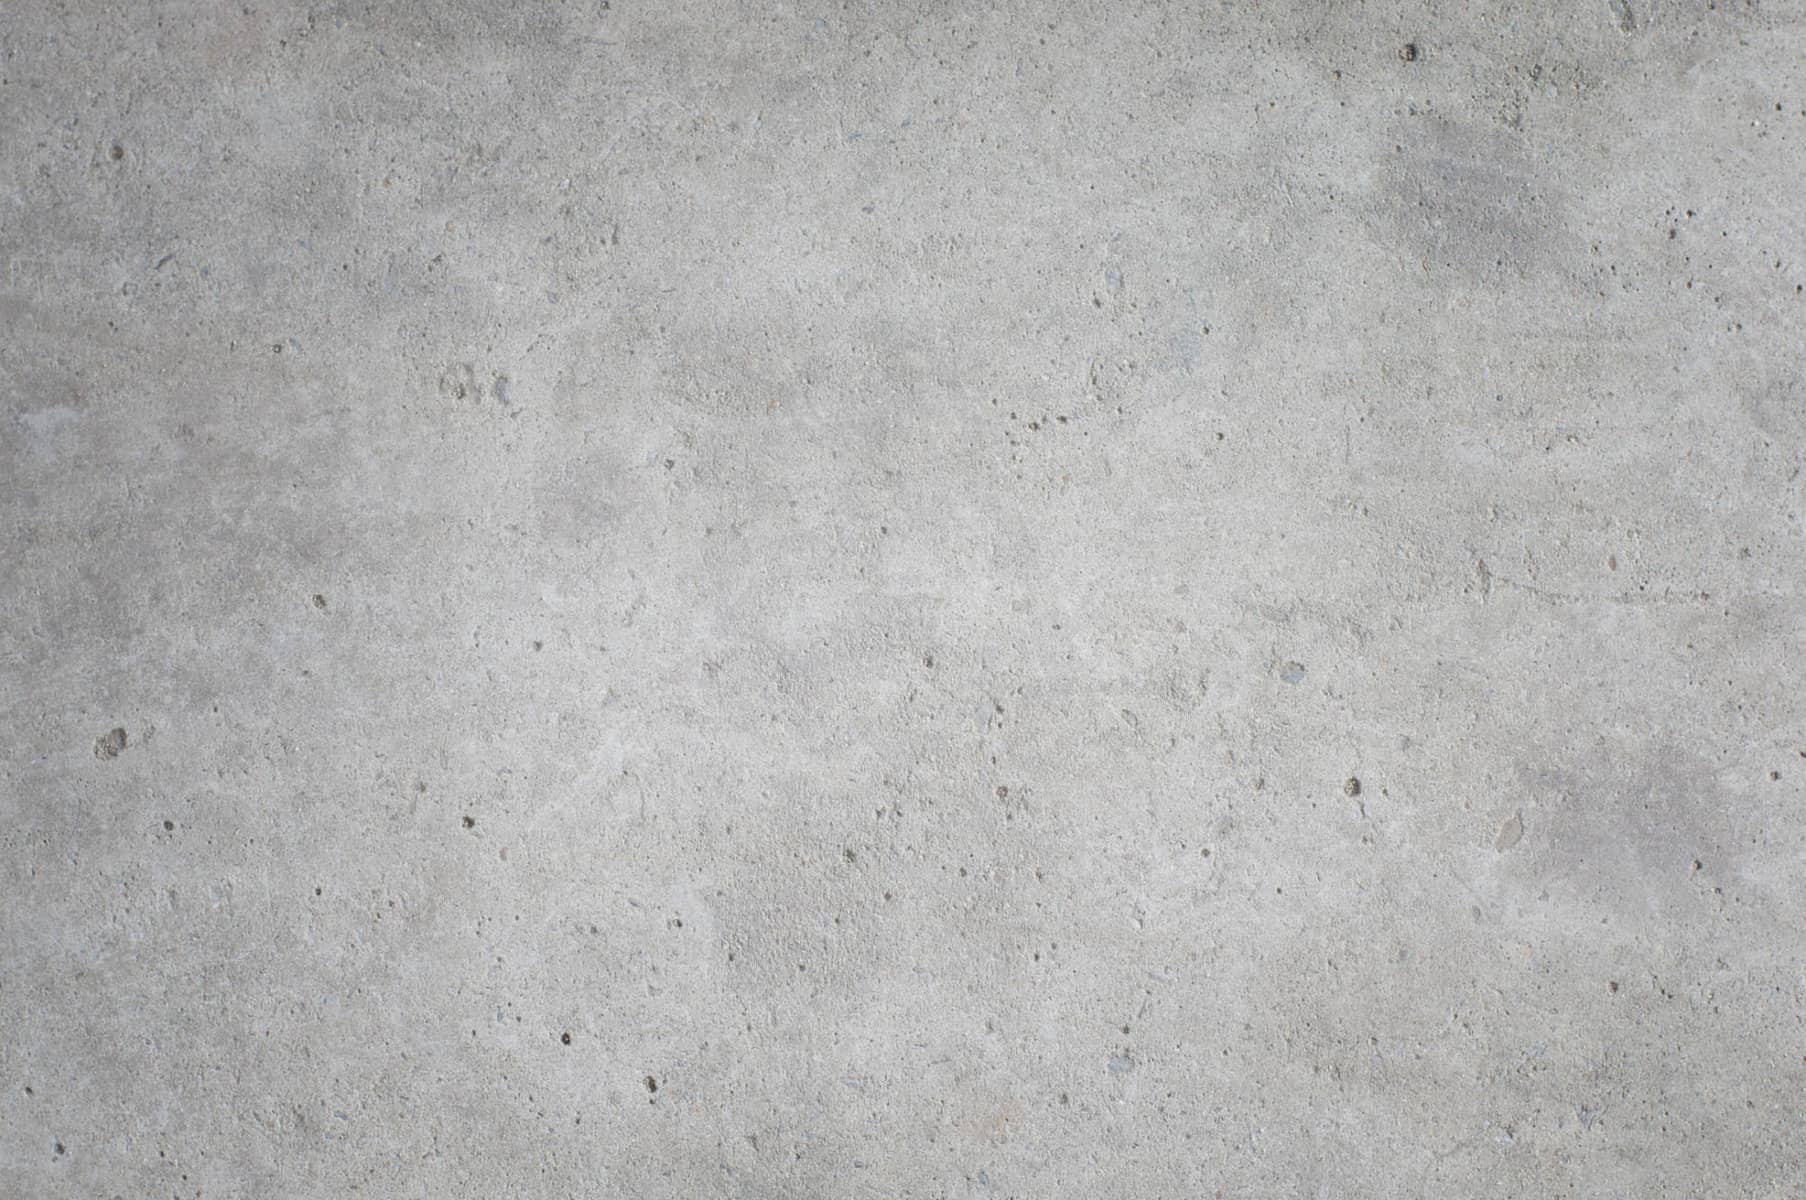 Cement floor texture, concrete floor texture use for background | Civil + Structural Engineer